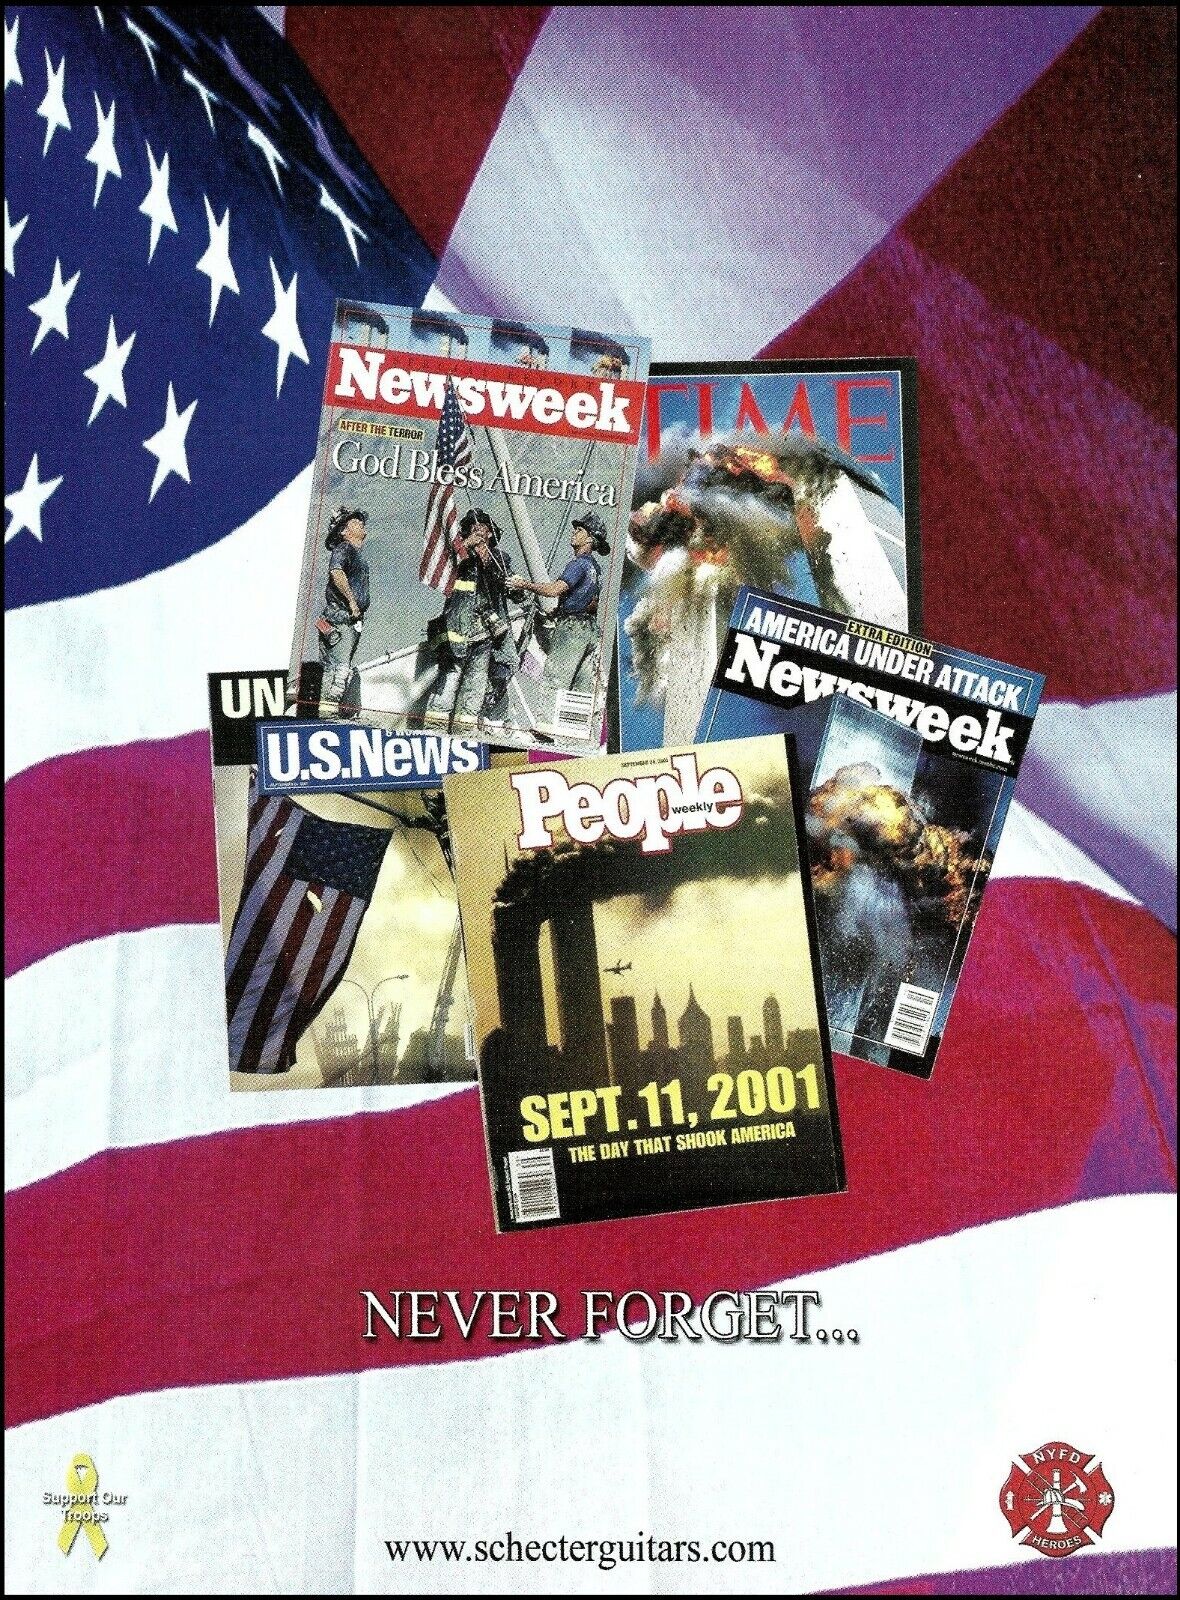 Schecter Guitars 9 11 2001 Never Forget NYC World Trade Center magazine cover ad